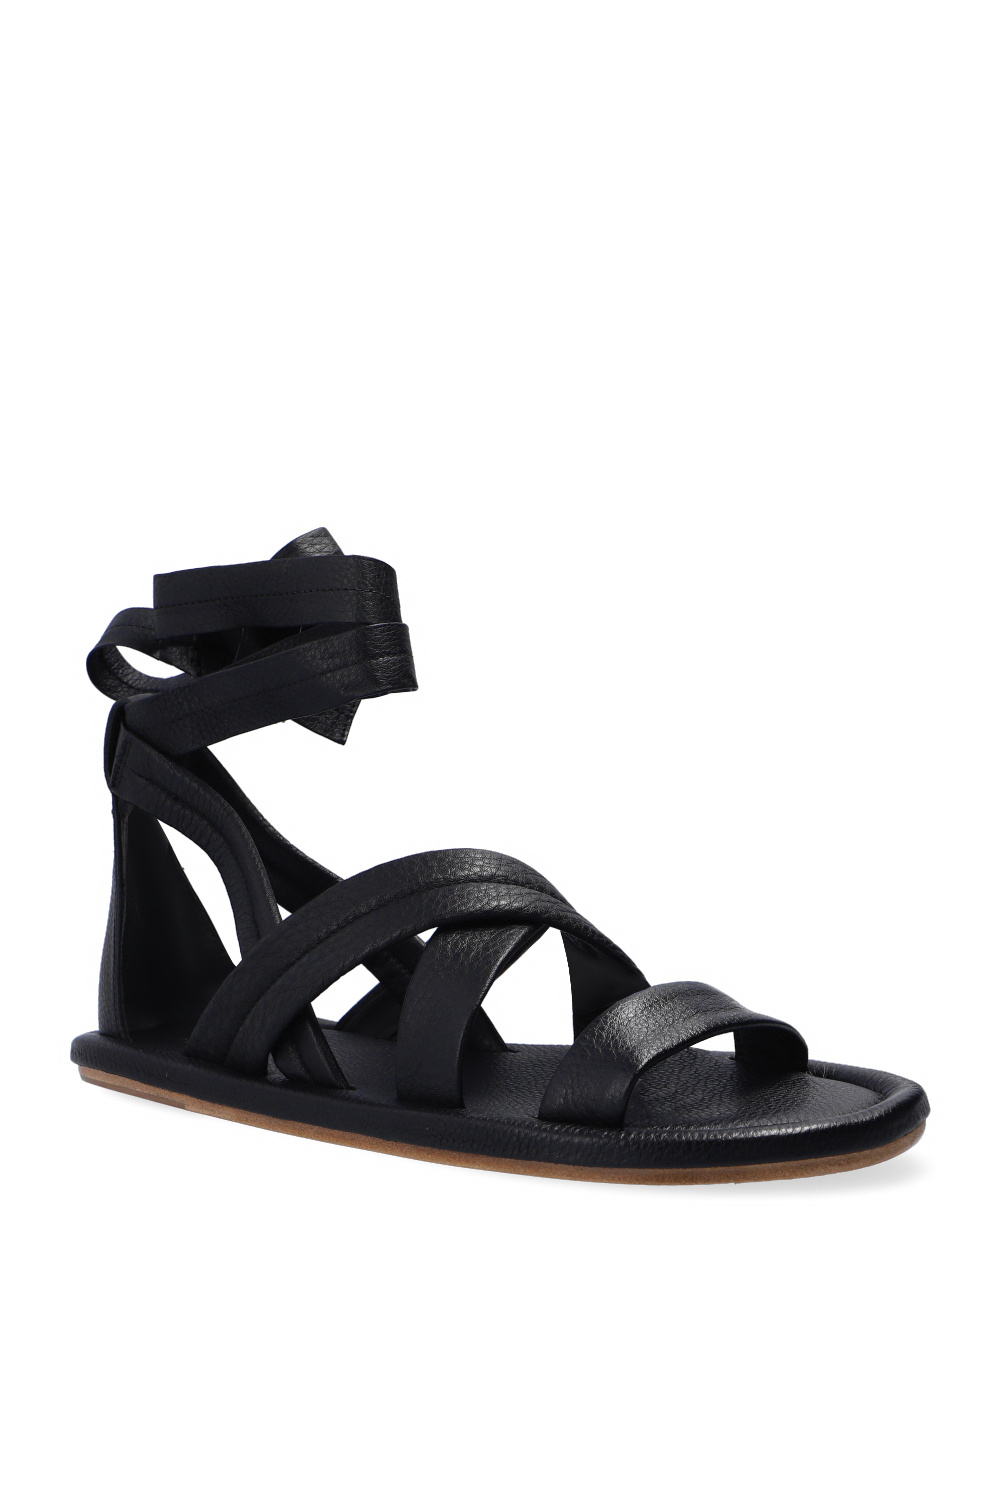 Marsell ‘Cornice’ leather sandals